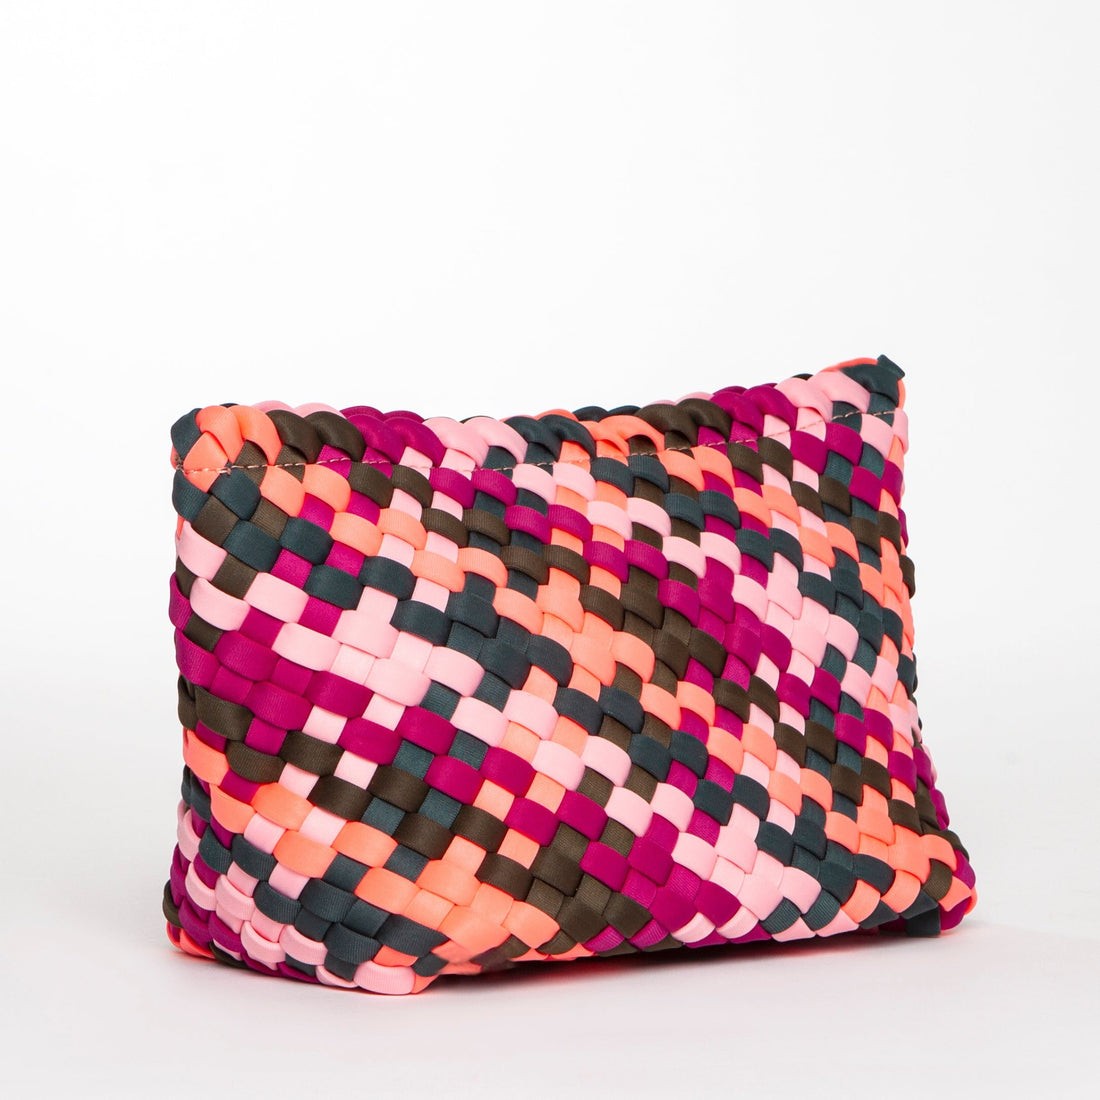 Andreina Bags Lola cosmetic multi colour accessory bag purse. Perfect accessory to take with you to the gym, beach, coffee or travelling. It can be folded and easily packed in the luggage. 